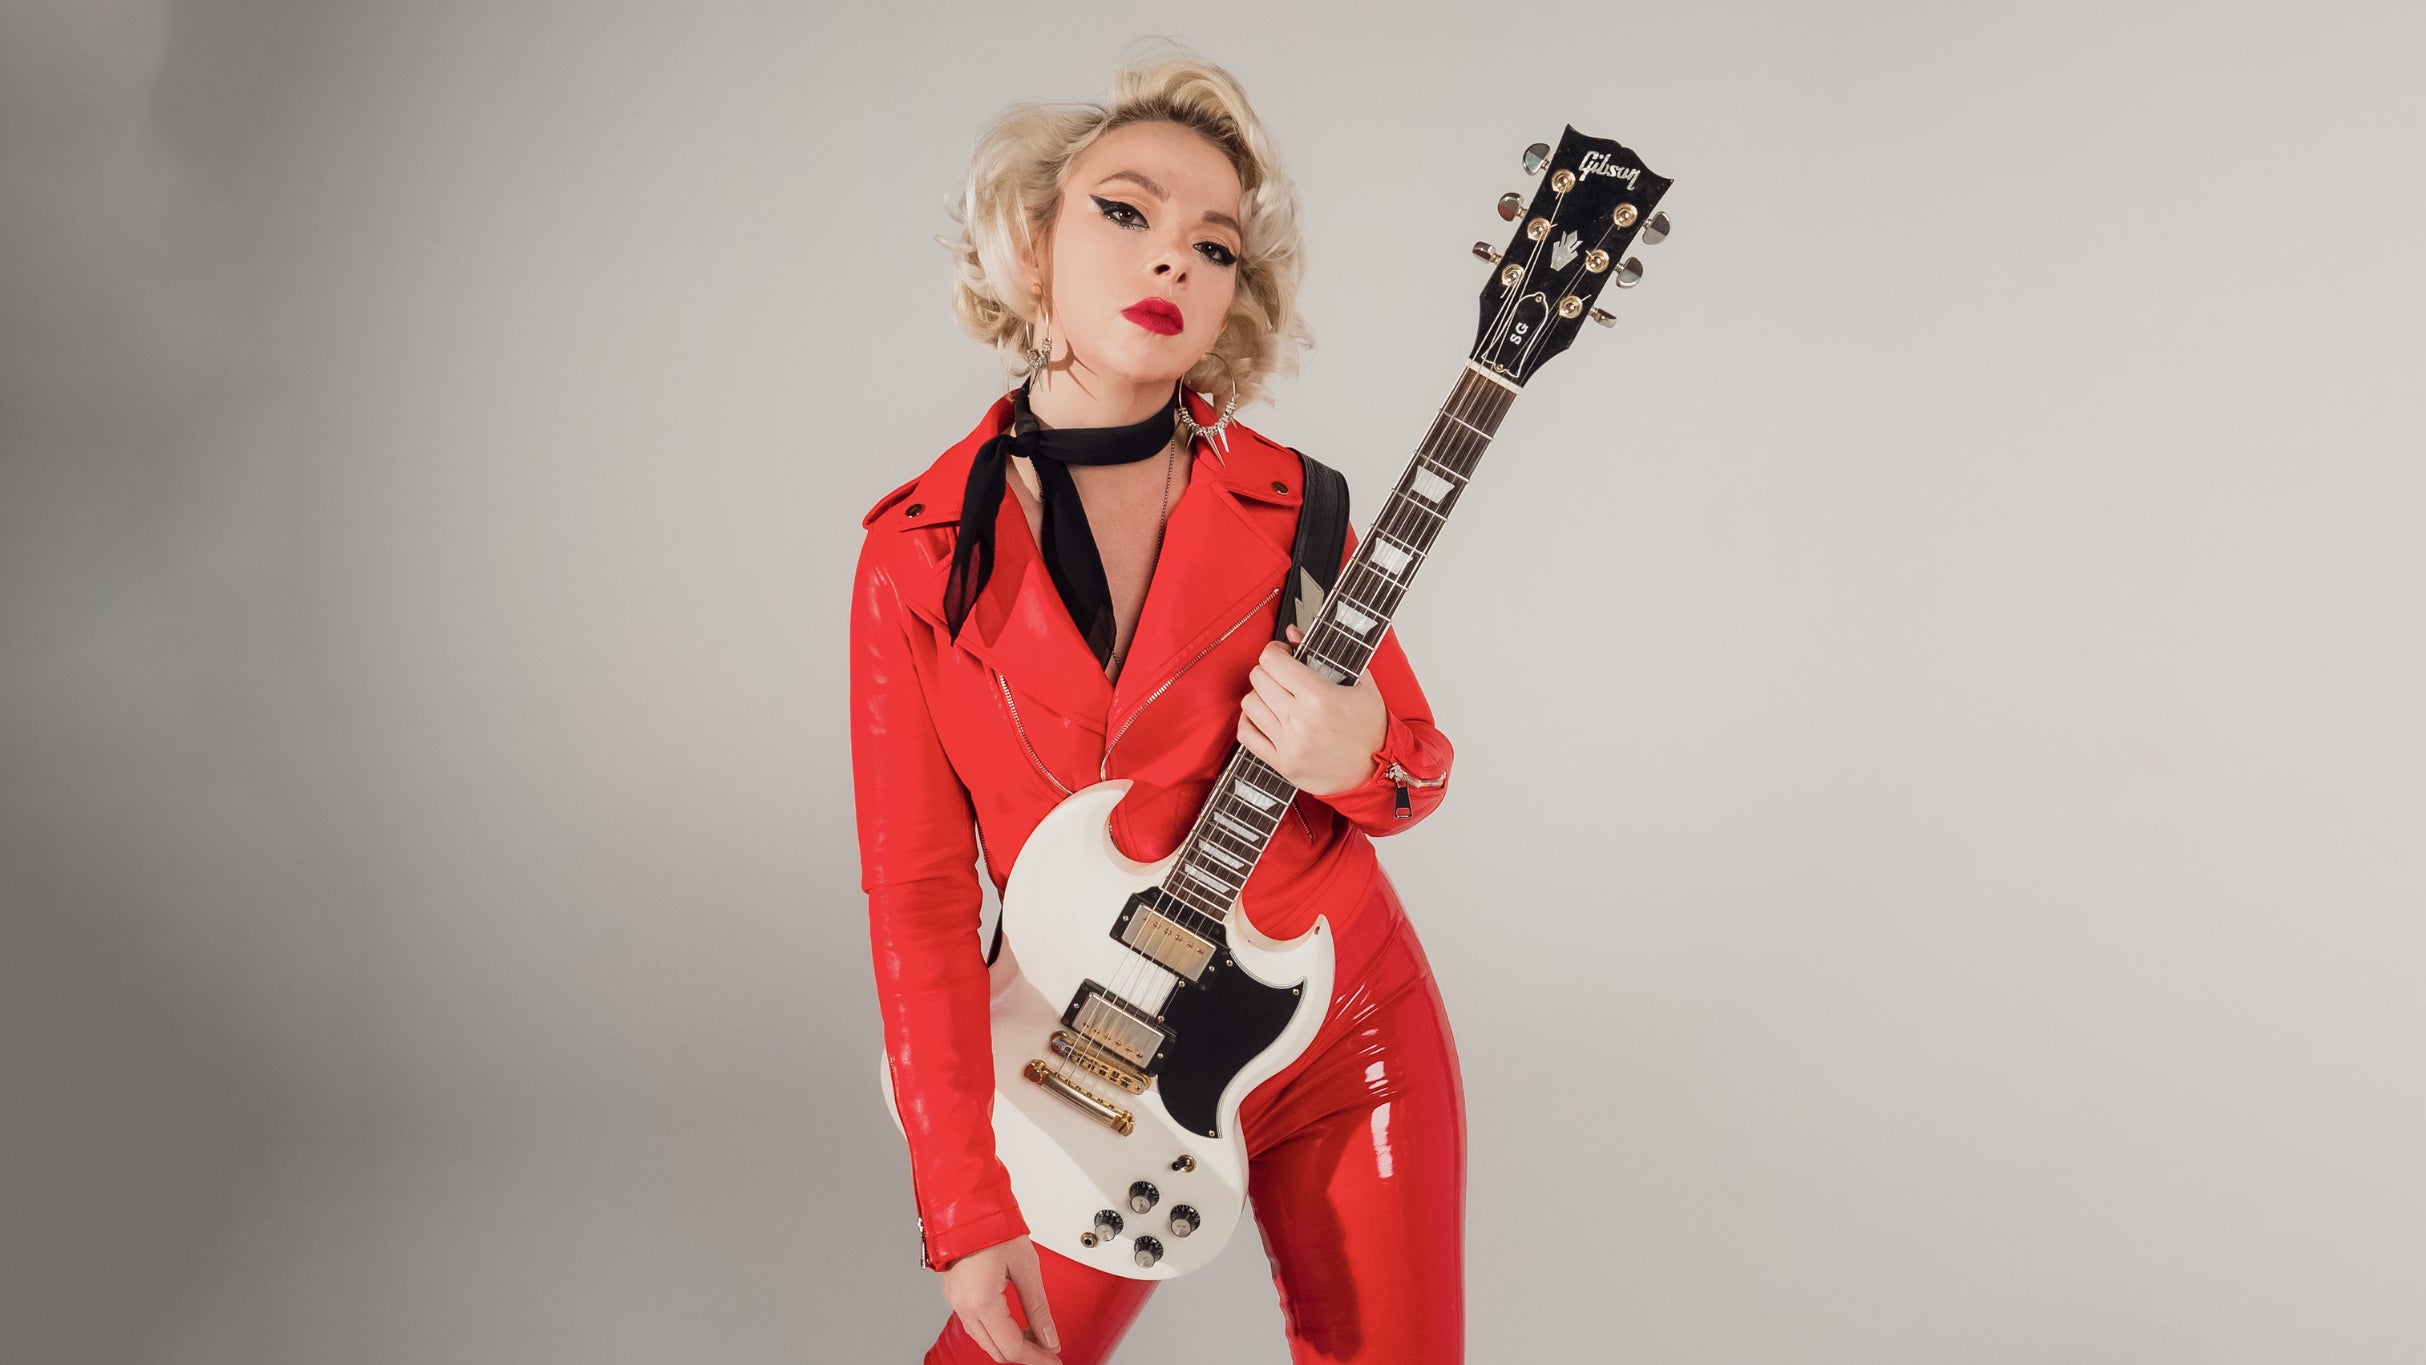 Samantha Fish w/ Kenny Wayne Shepherd, Tab Benoit, Eric Gales and more in New Orleans promo photo for Fest After Dark Promo presale offer code